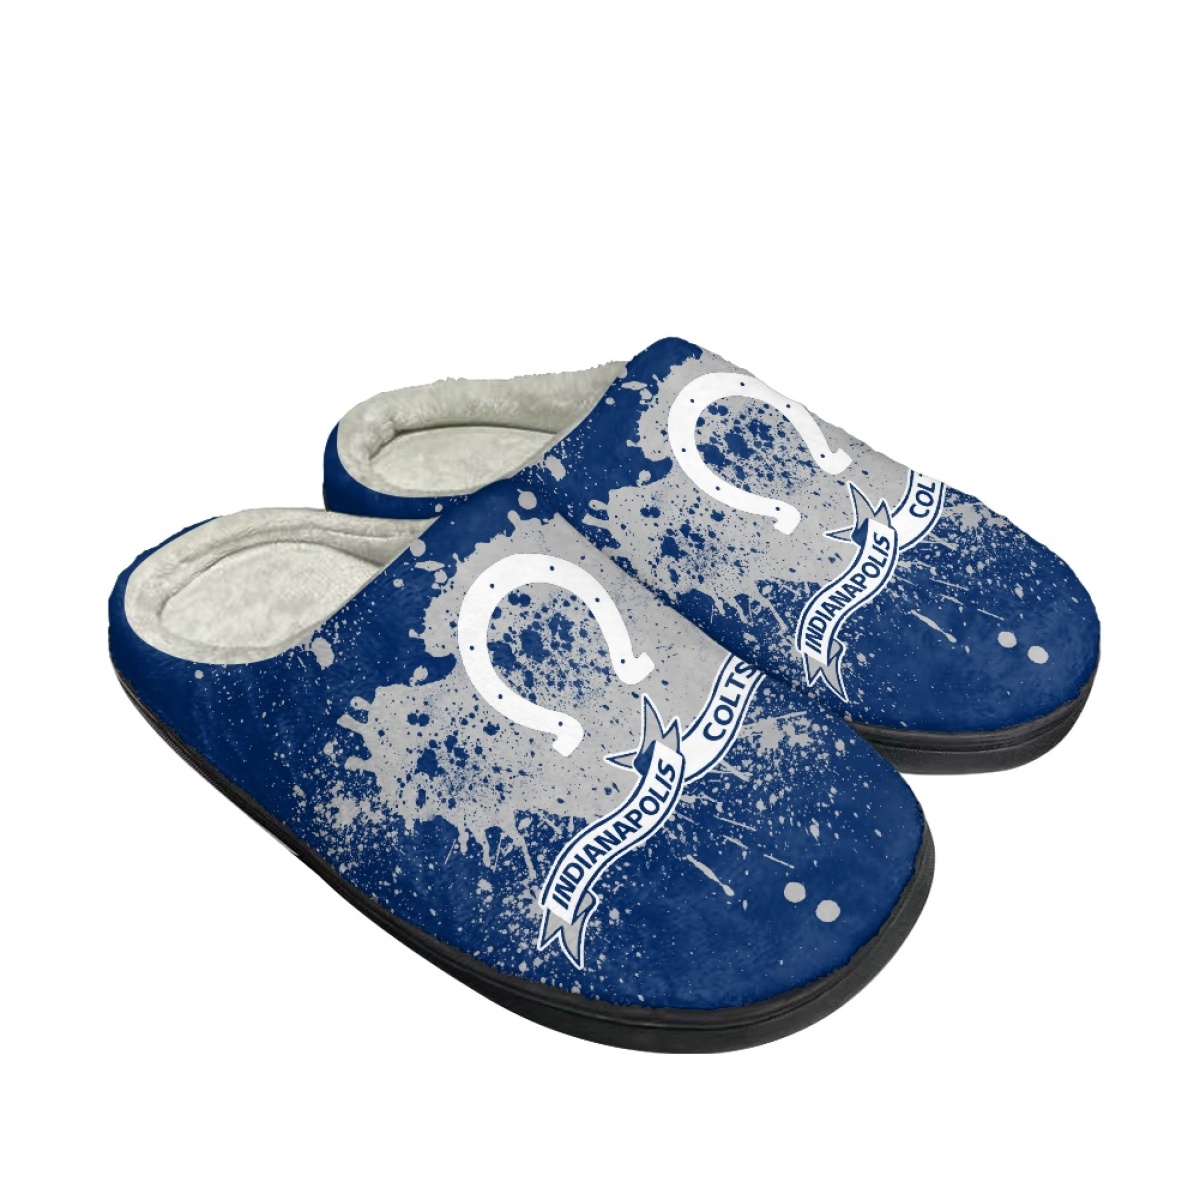 Men's Indianapolis Colts Slippers/Shoes 006